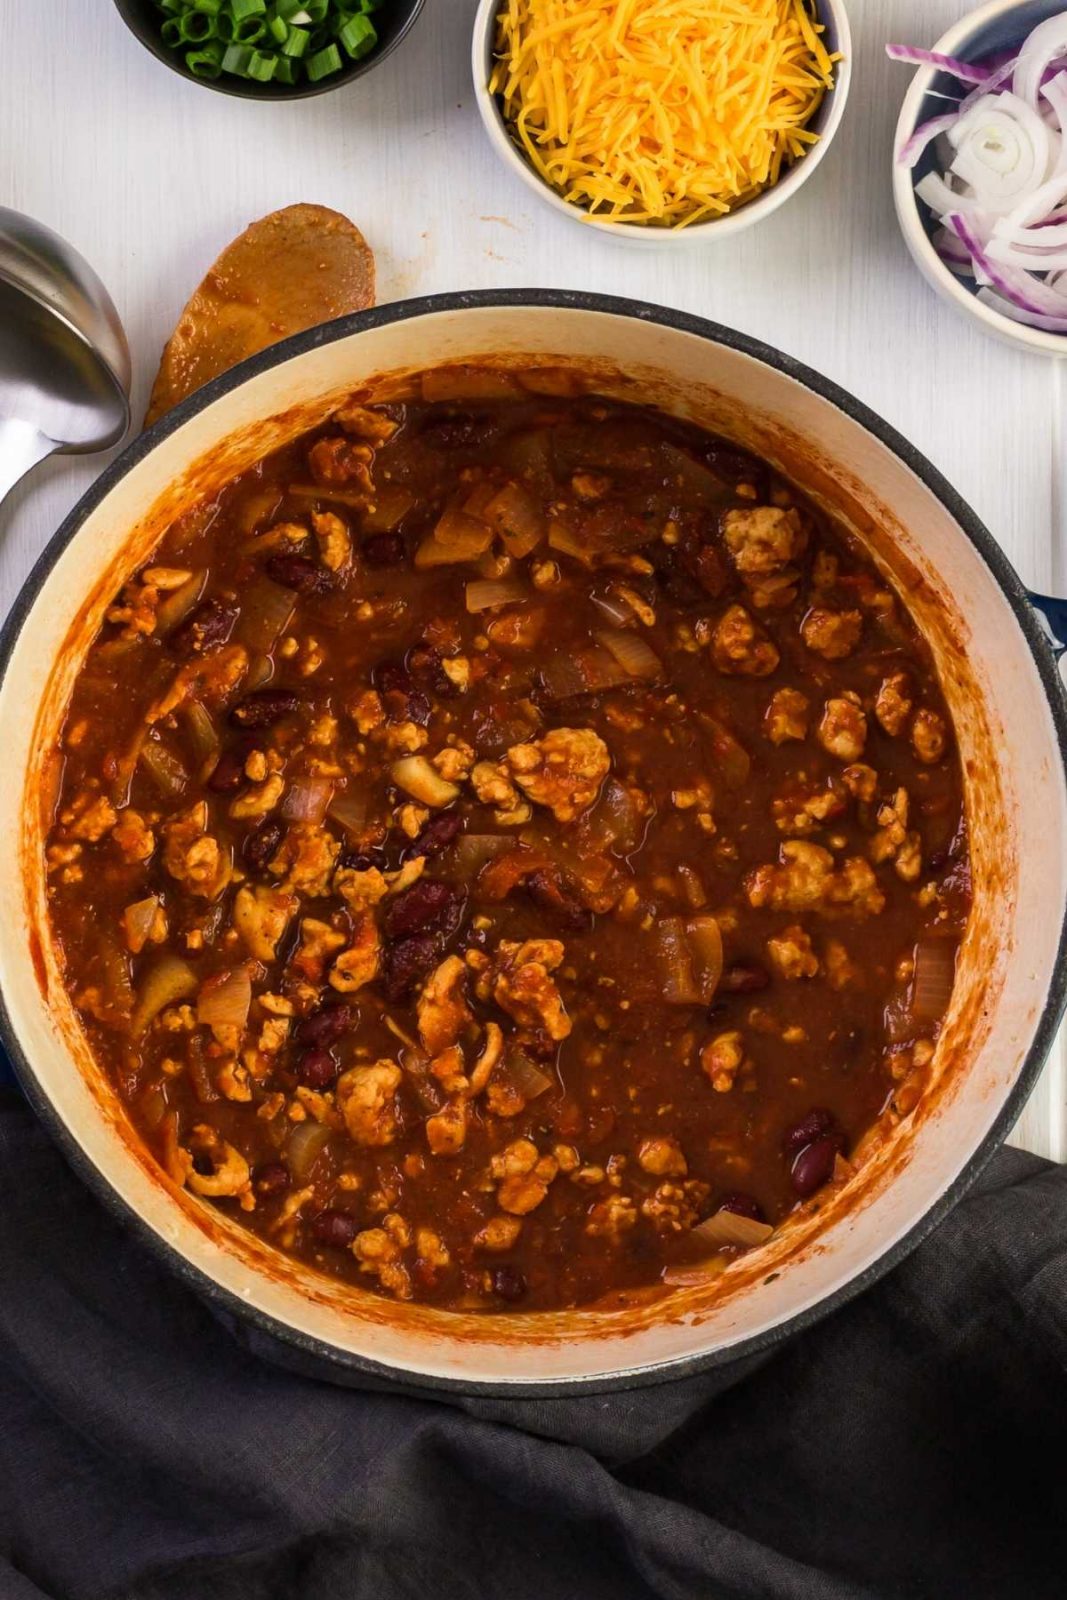 If you’ve made a big batch of chili on the weekend and plan to serve it as leftovers during the week, you’ll need to store it in the appropriate container in the refrigerator. The last thing you want to do is toss out the food you spent time preparing. This article will help you get the most out of your chili, and any other leftovers you have too!